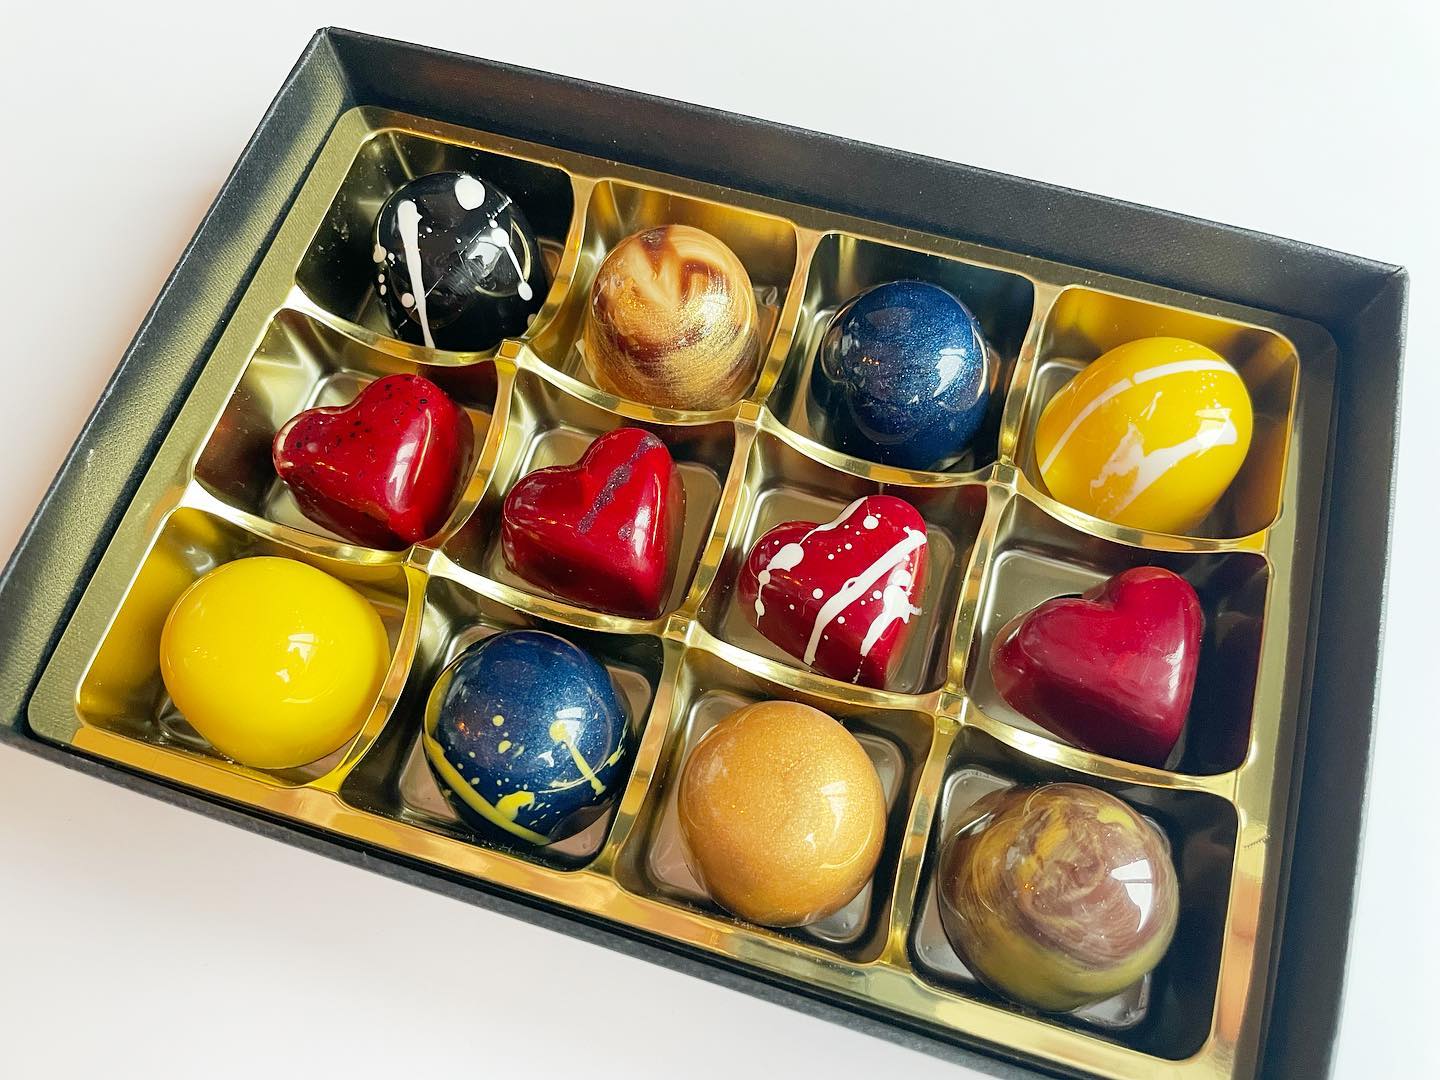 blue, yellow, red, black chocolates in box on white table made by Brighton Cacao Company chocolate shop in Brighton